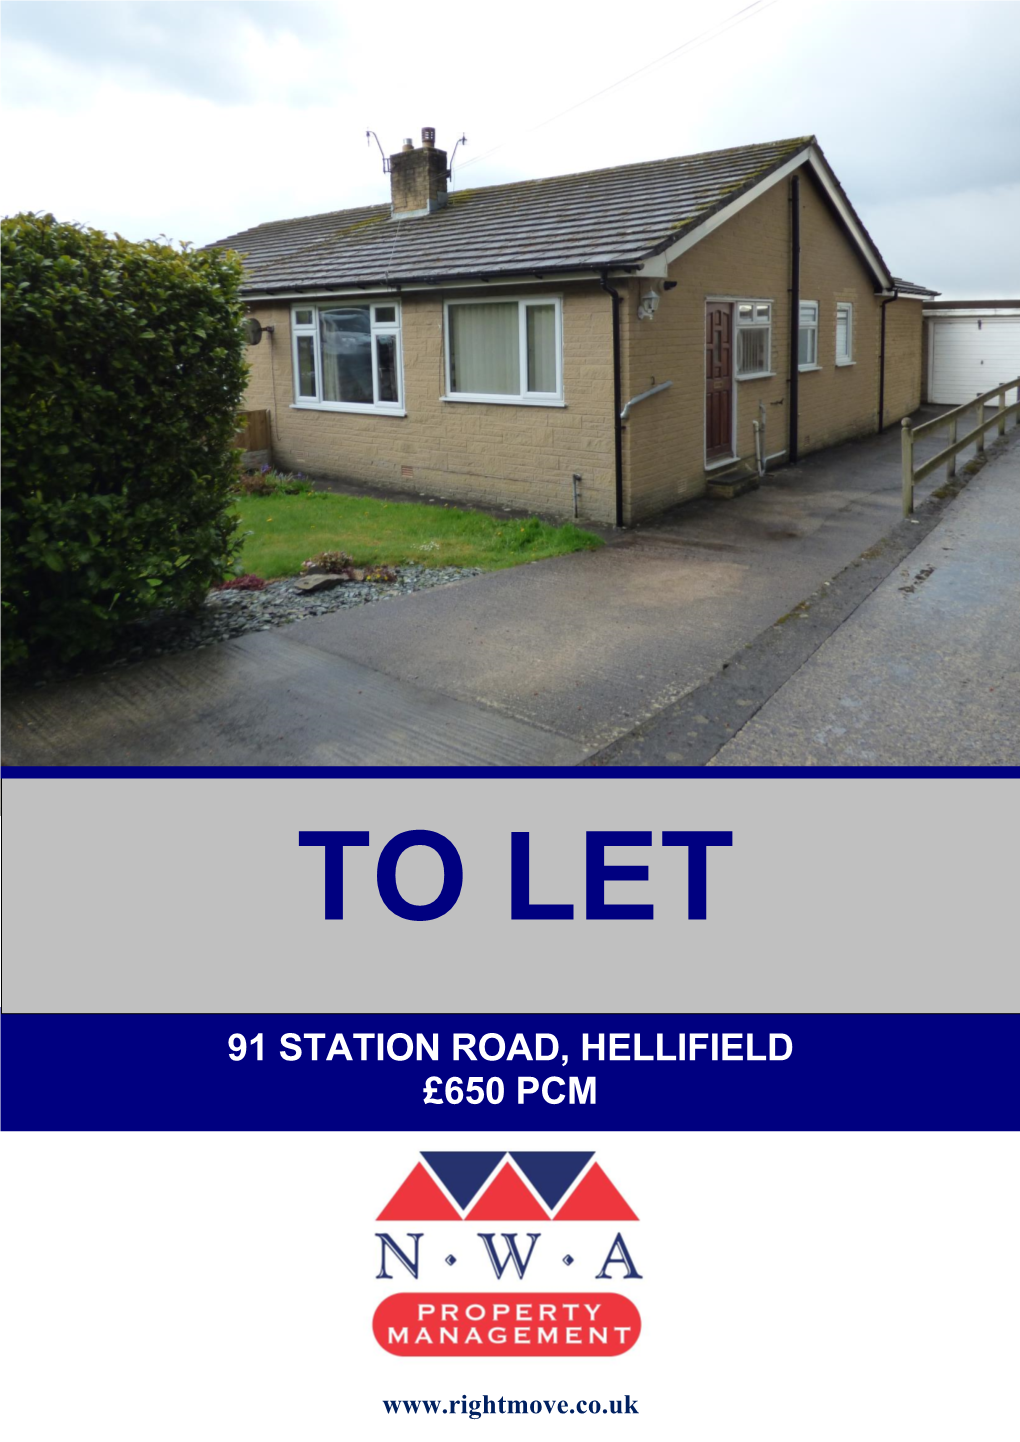 91 Station Road, Hellifield £650 Pcm